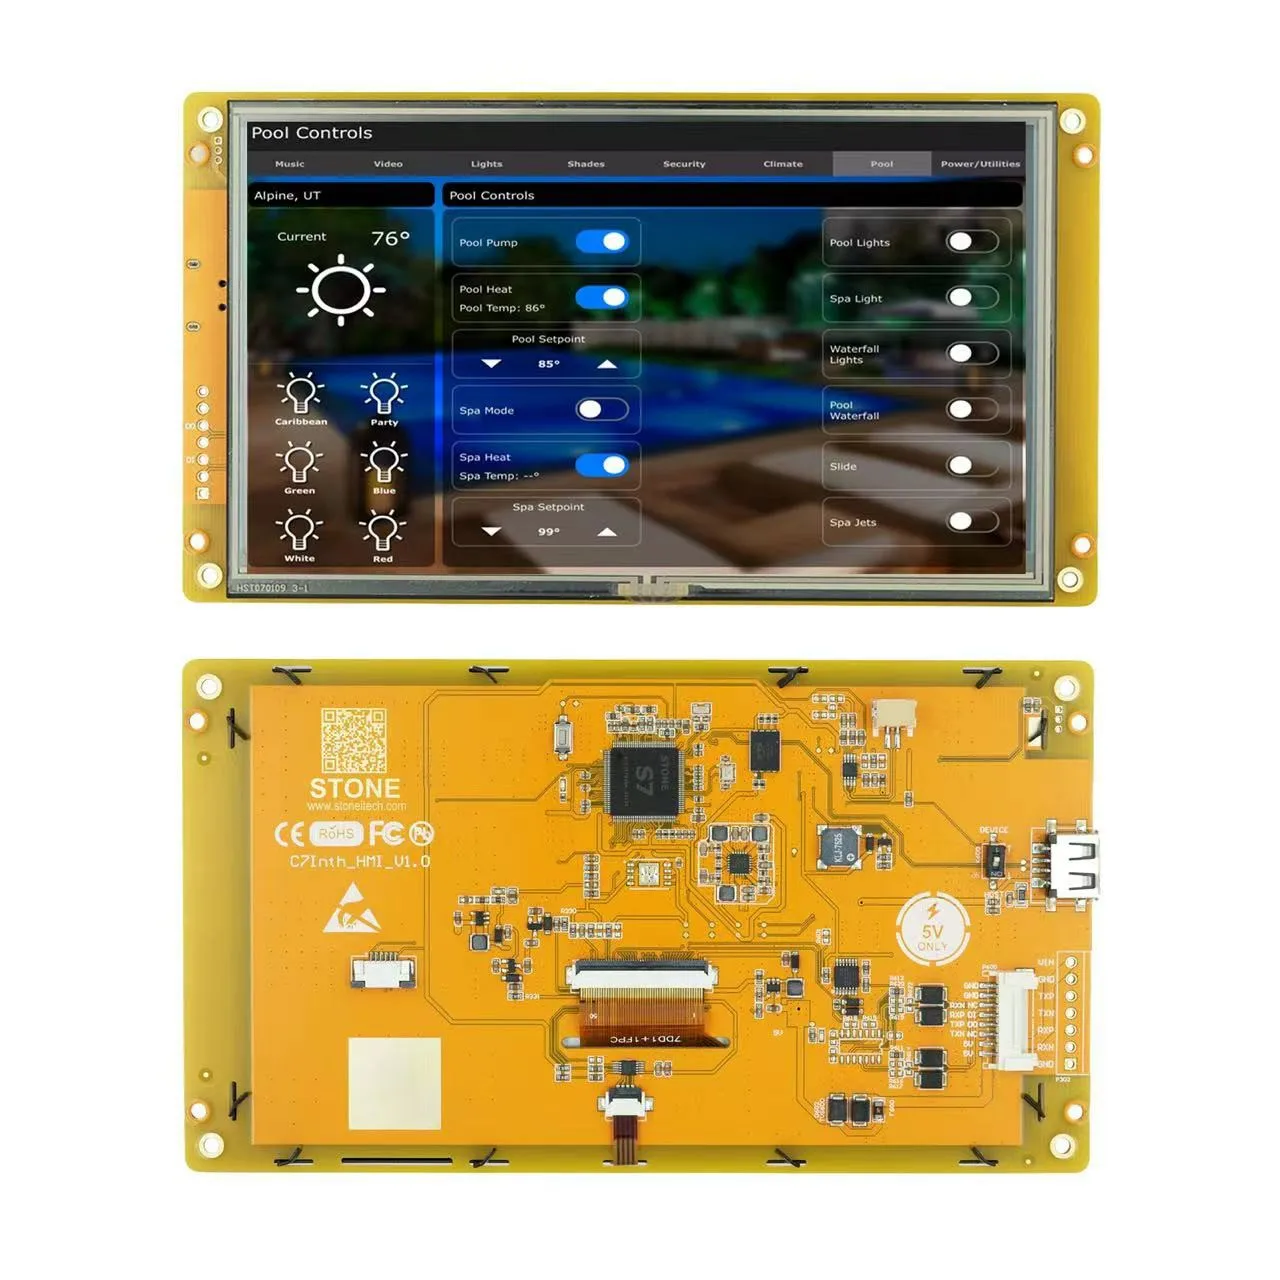 7.0 TFT Touch Screen Connect with customer is MCU through RS232,TTL directly control the TFT-LCD Module via Command Set